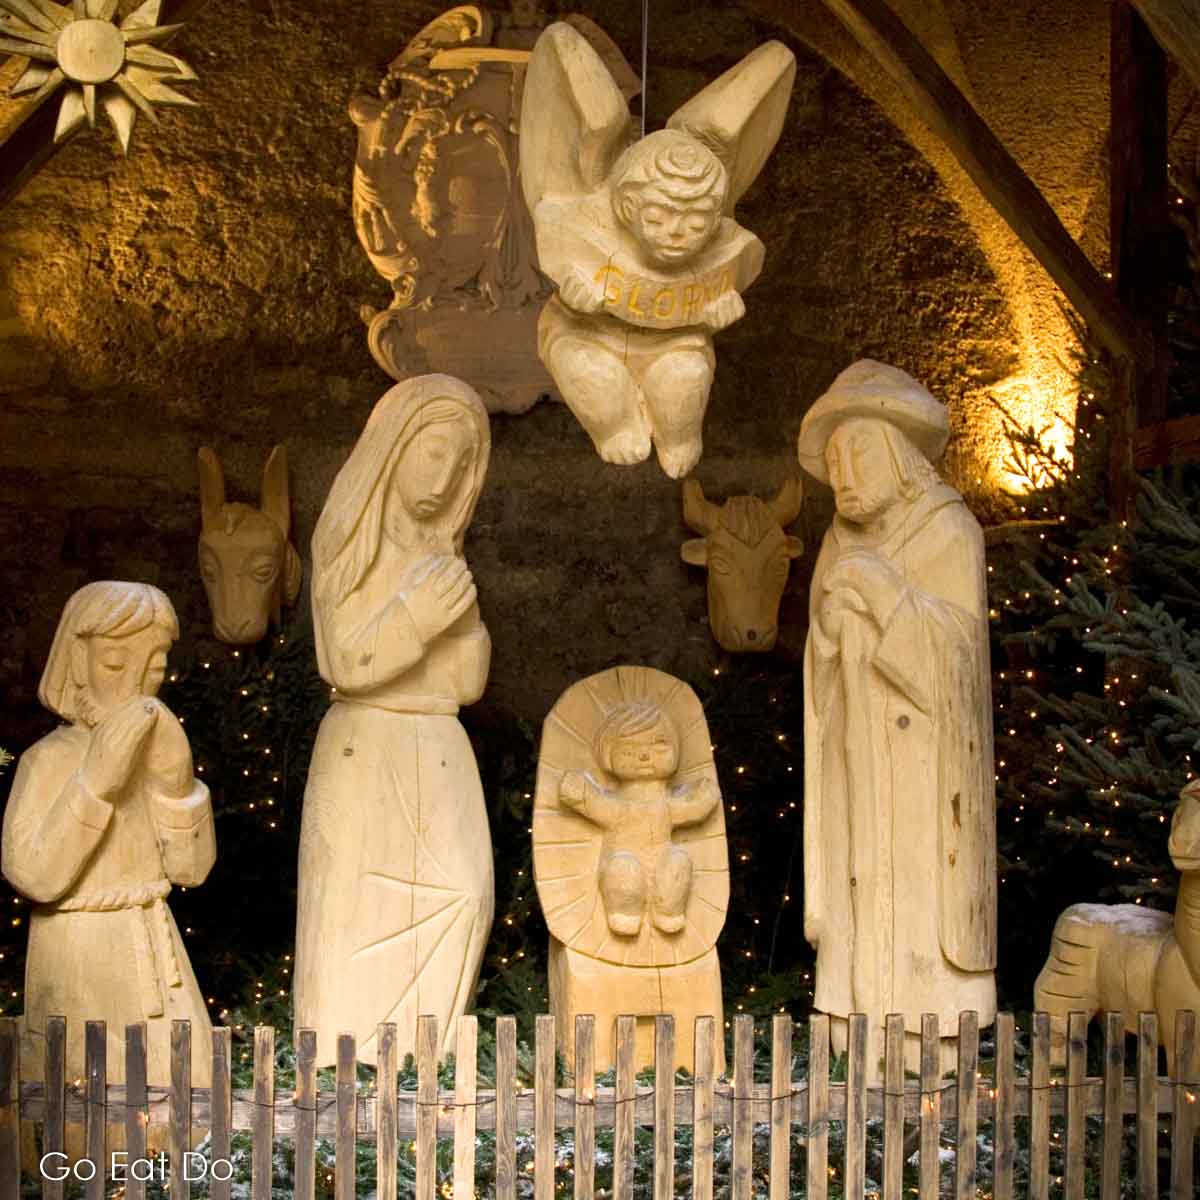 Carved wooden figures in a crib at a Sallzburg Christmas market.